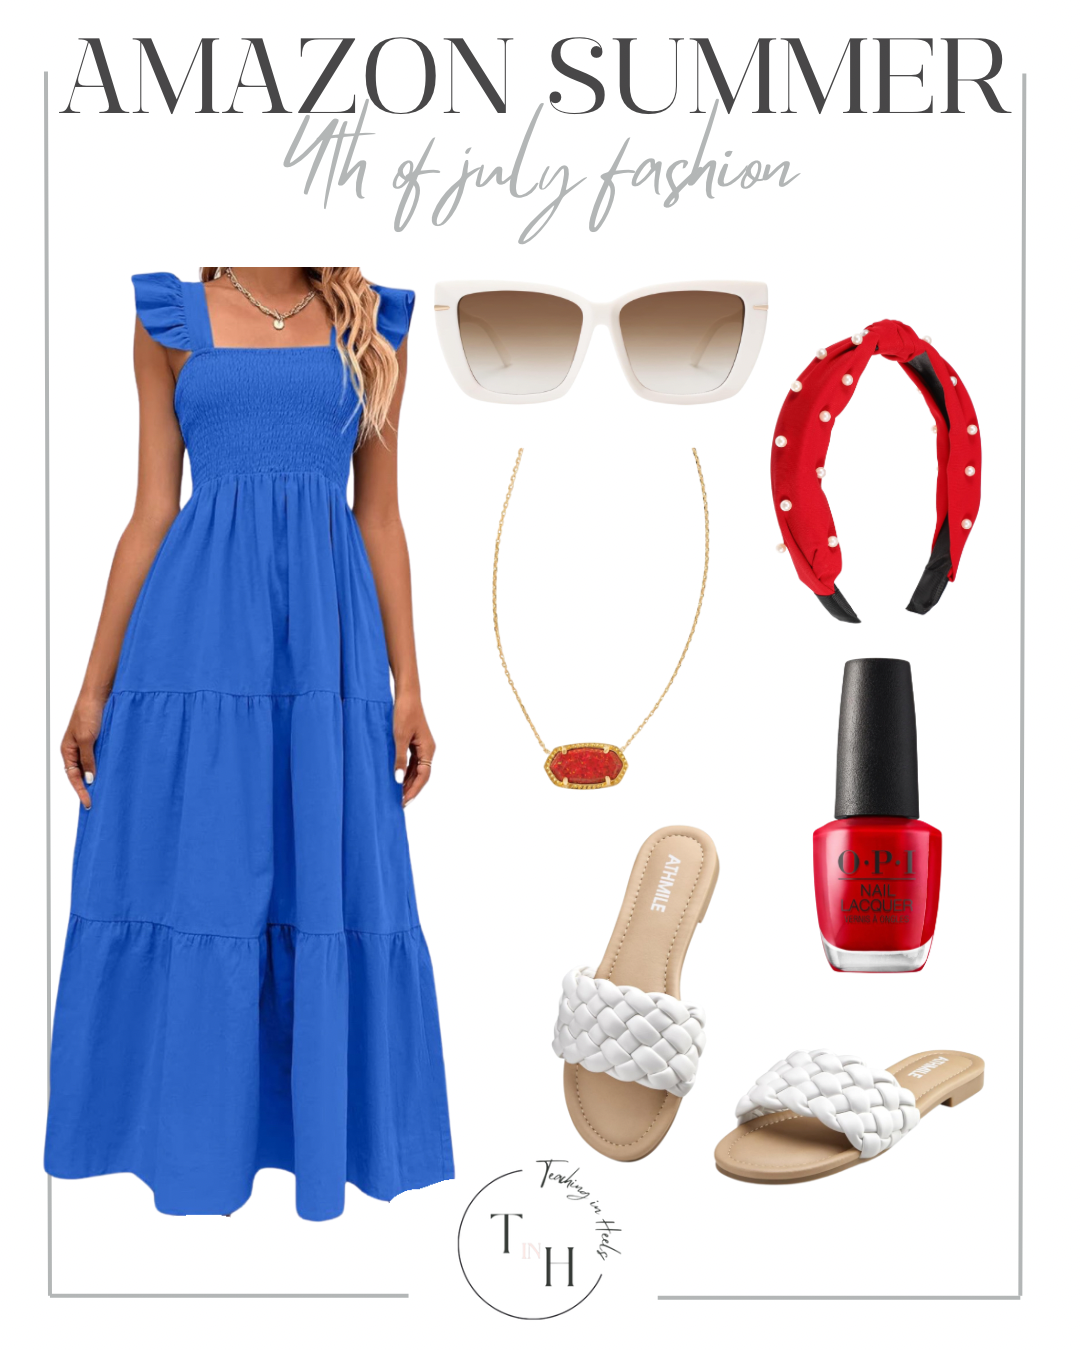 4th of July Style Guide: Must-Have Outfits & Essentials

fourth of july, summer, summer outfit, summer fashion, outdoor hosting, red white & blue, maxi dress, blue summer dress, sandals, sunglasses